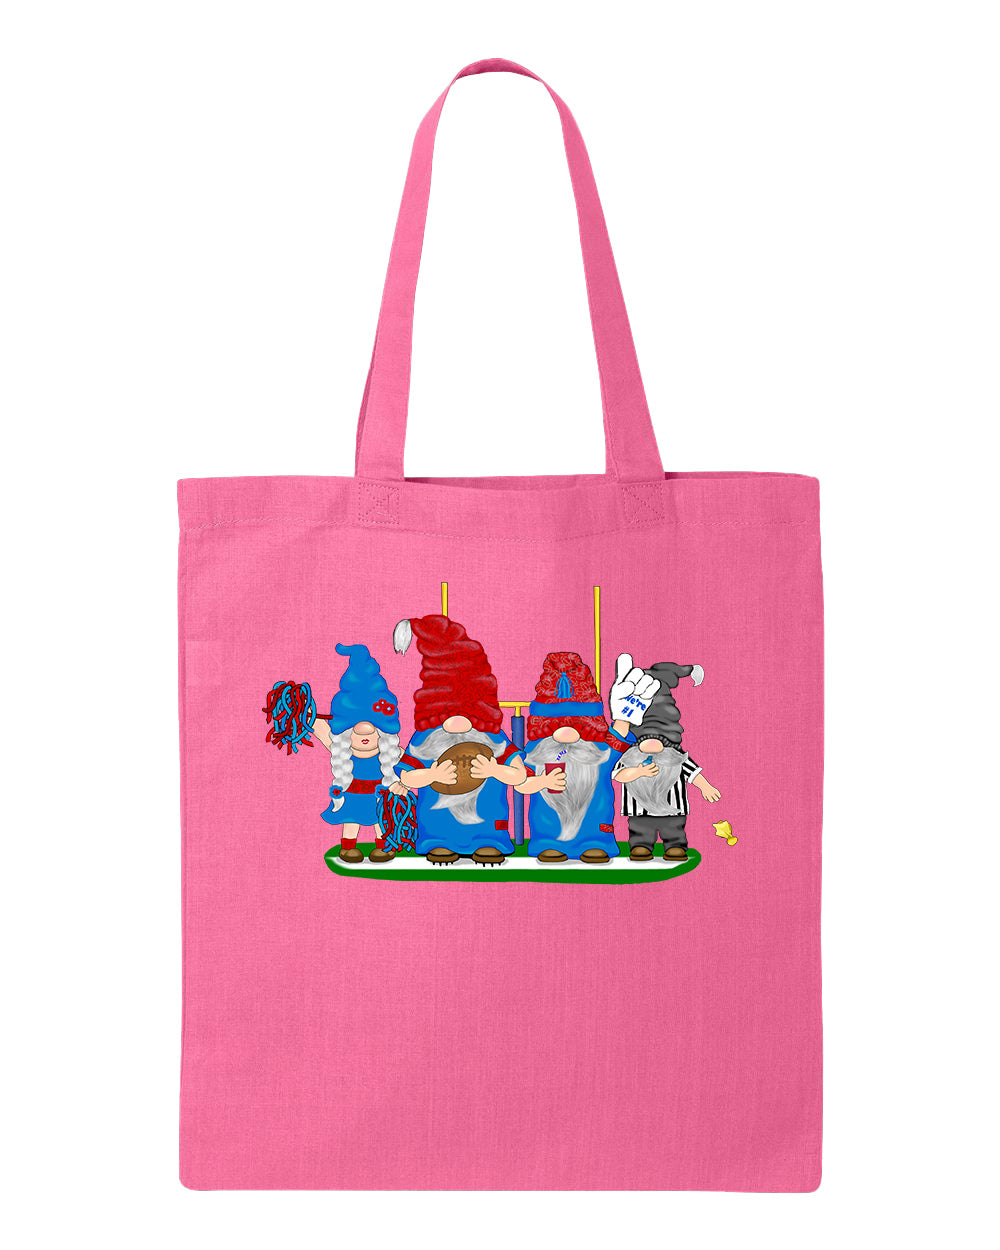 Red & Blue Football Gnomes  (similar to Buffalo) on Tote